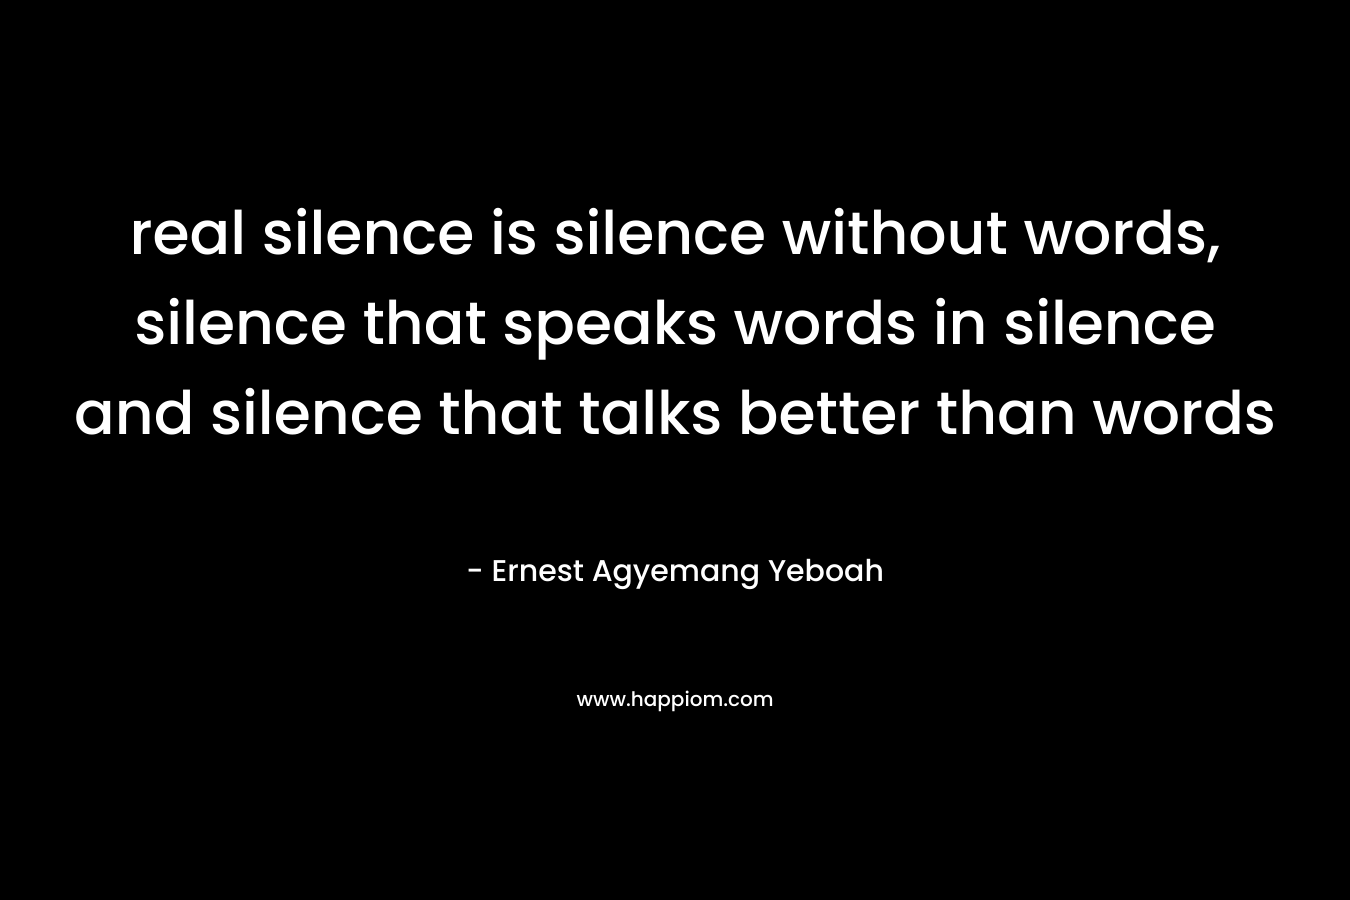 real silence is silence without words, silence that speaks words in silence and silence that talks better than words – Ernest Agyemang Yeboah